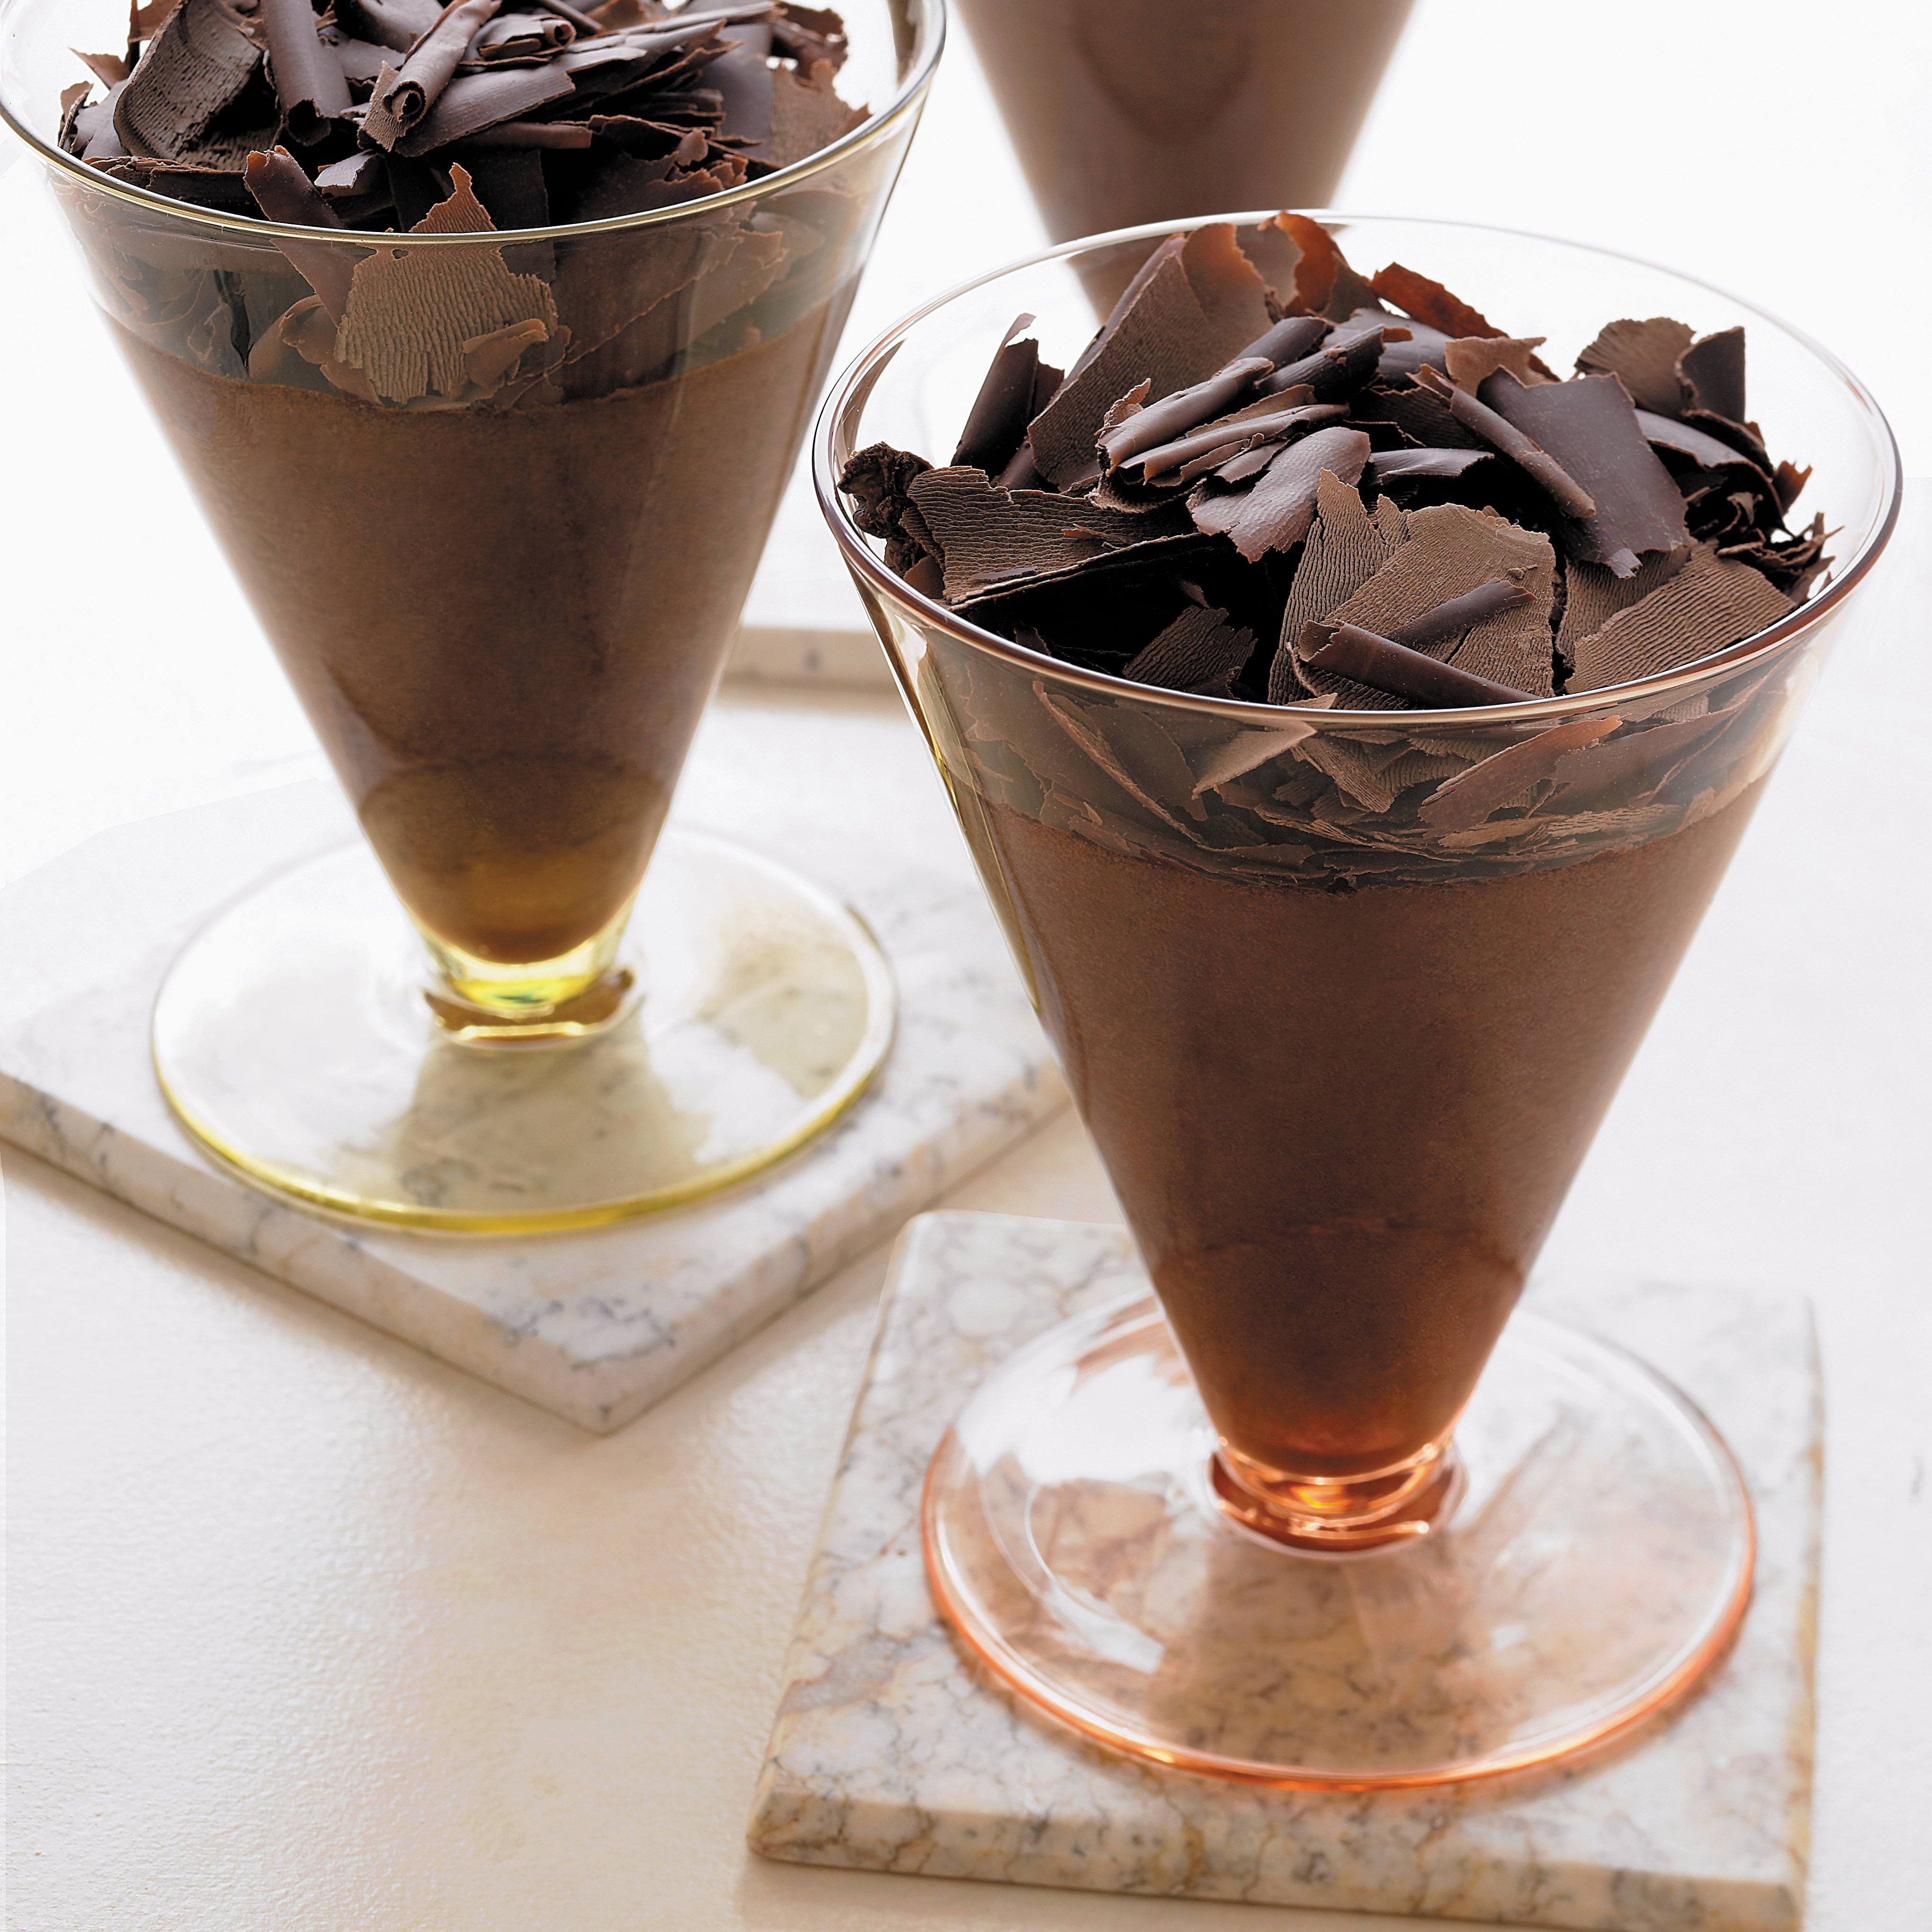 How To Make Chocolate Mousse
 how to make chocolate mousse easy